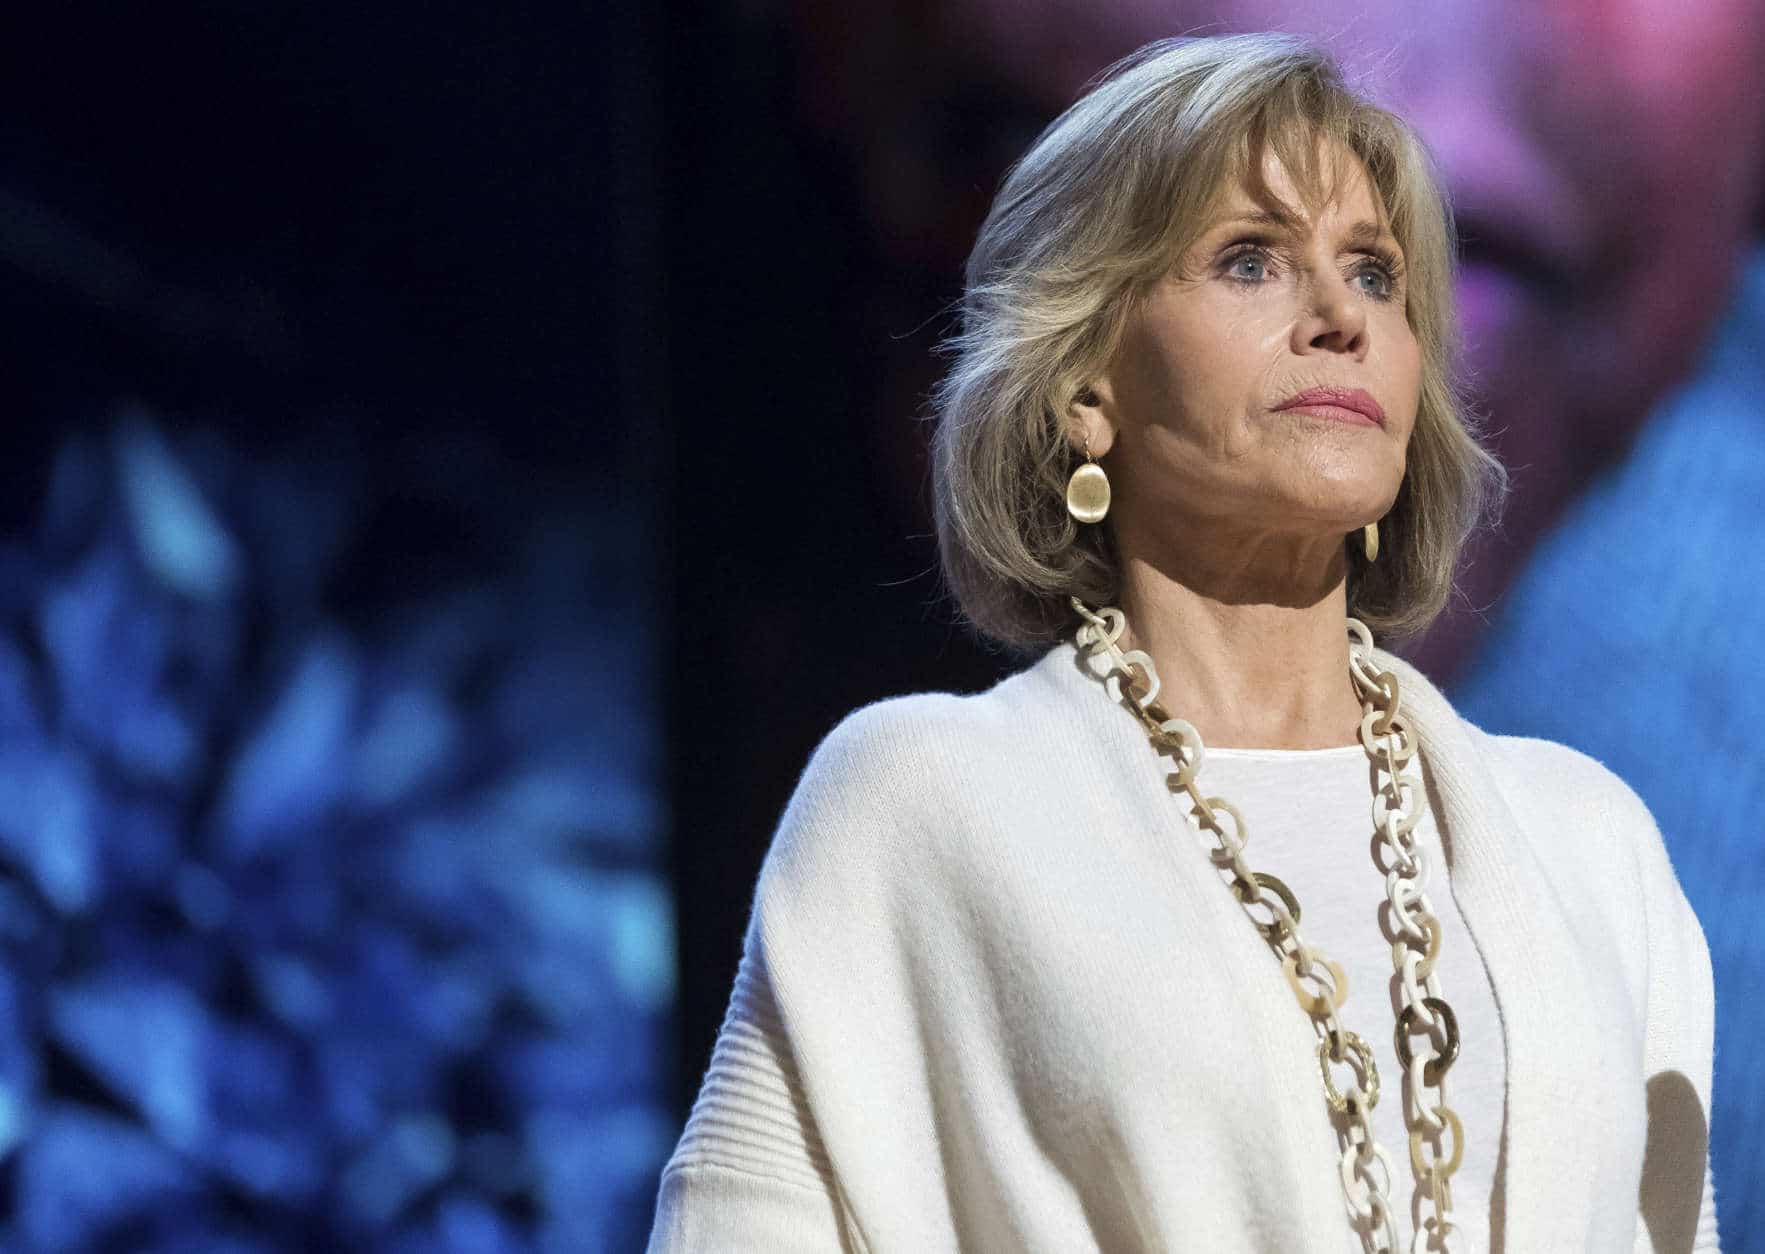 Jane Fonda appears during rehearsals for the 90th Academy Awards in Los Angeles on Saturday, March 3, 2018. The Academy Awards will be held at the Dolby Theatre on Sunday, March 4. (Photo by Charles Sykes/Invision/AP)